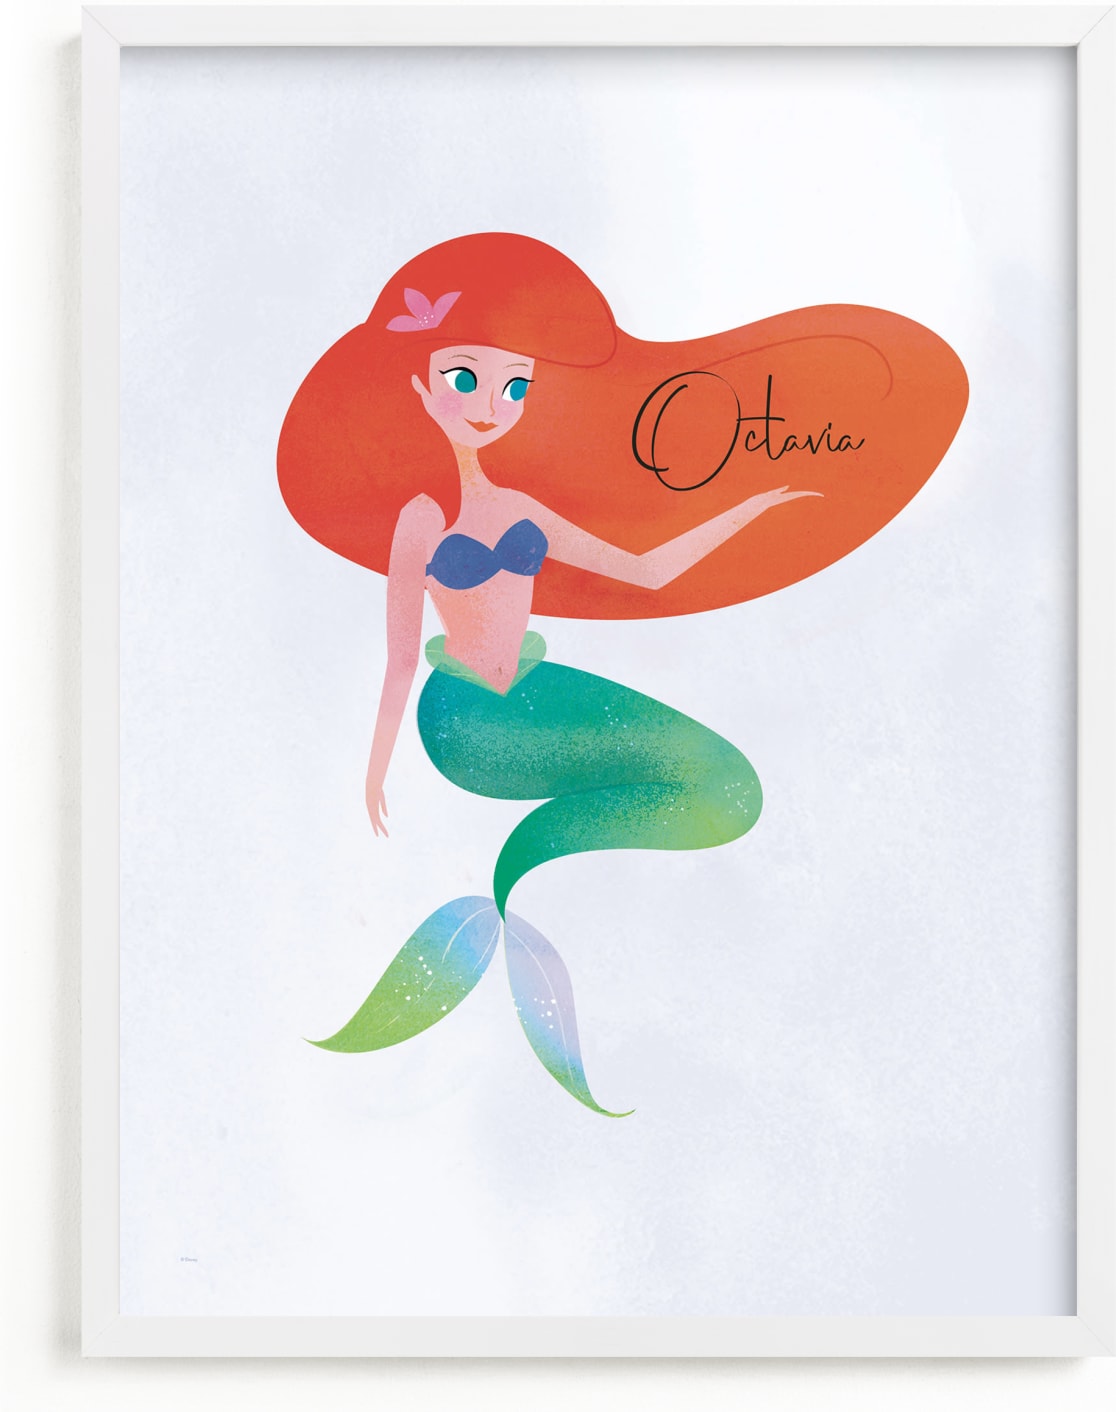 This is a colorful disney art by Lori Wemple called Under The Sea With Ariel from Disney's The Little Mermaid.